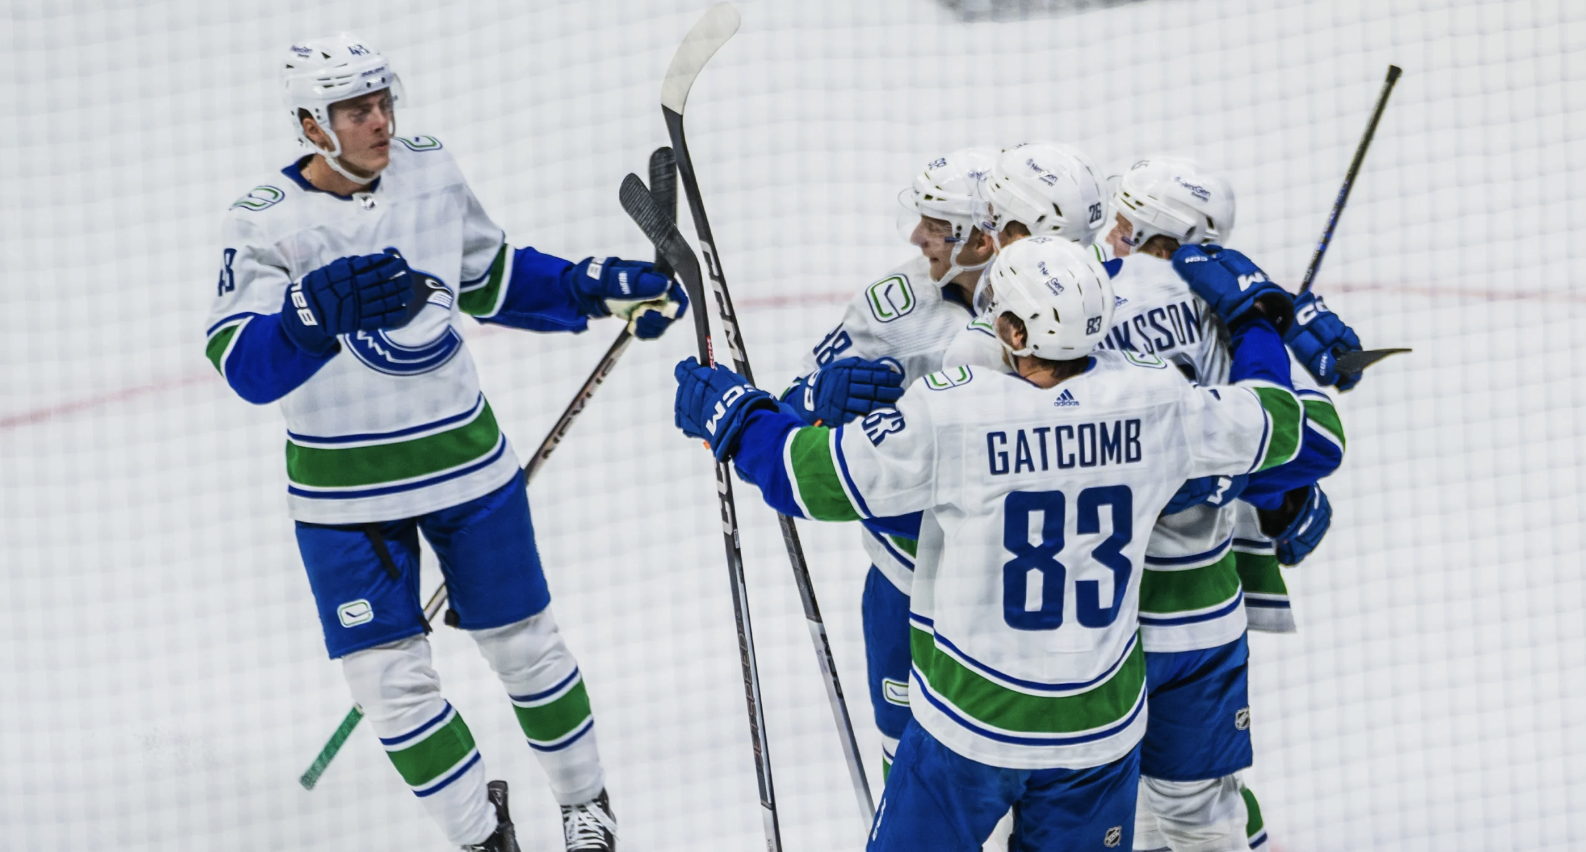 McDonough's shot and Alriksson's big game not enough as Canucks' Young  Stars fall in shootout to Jets - CanucksArmy